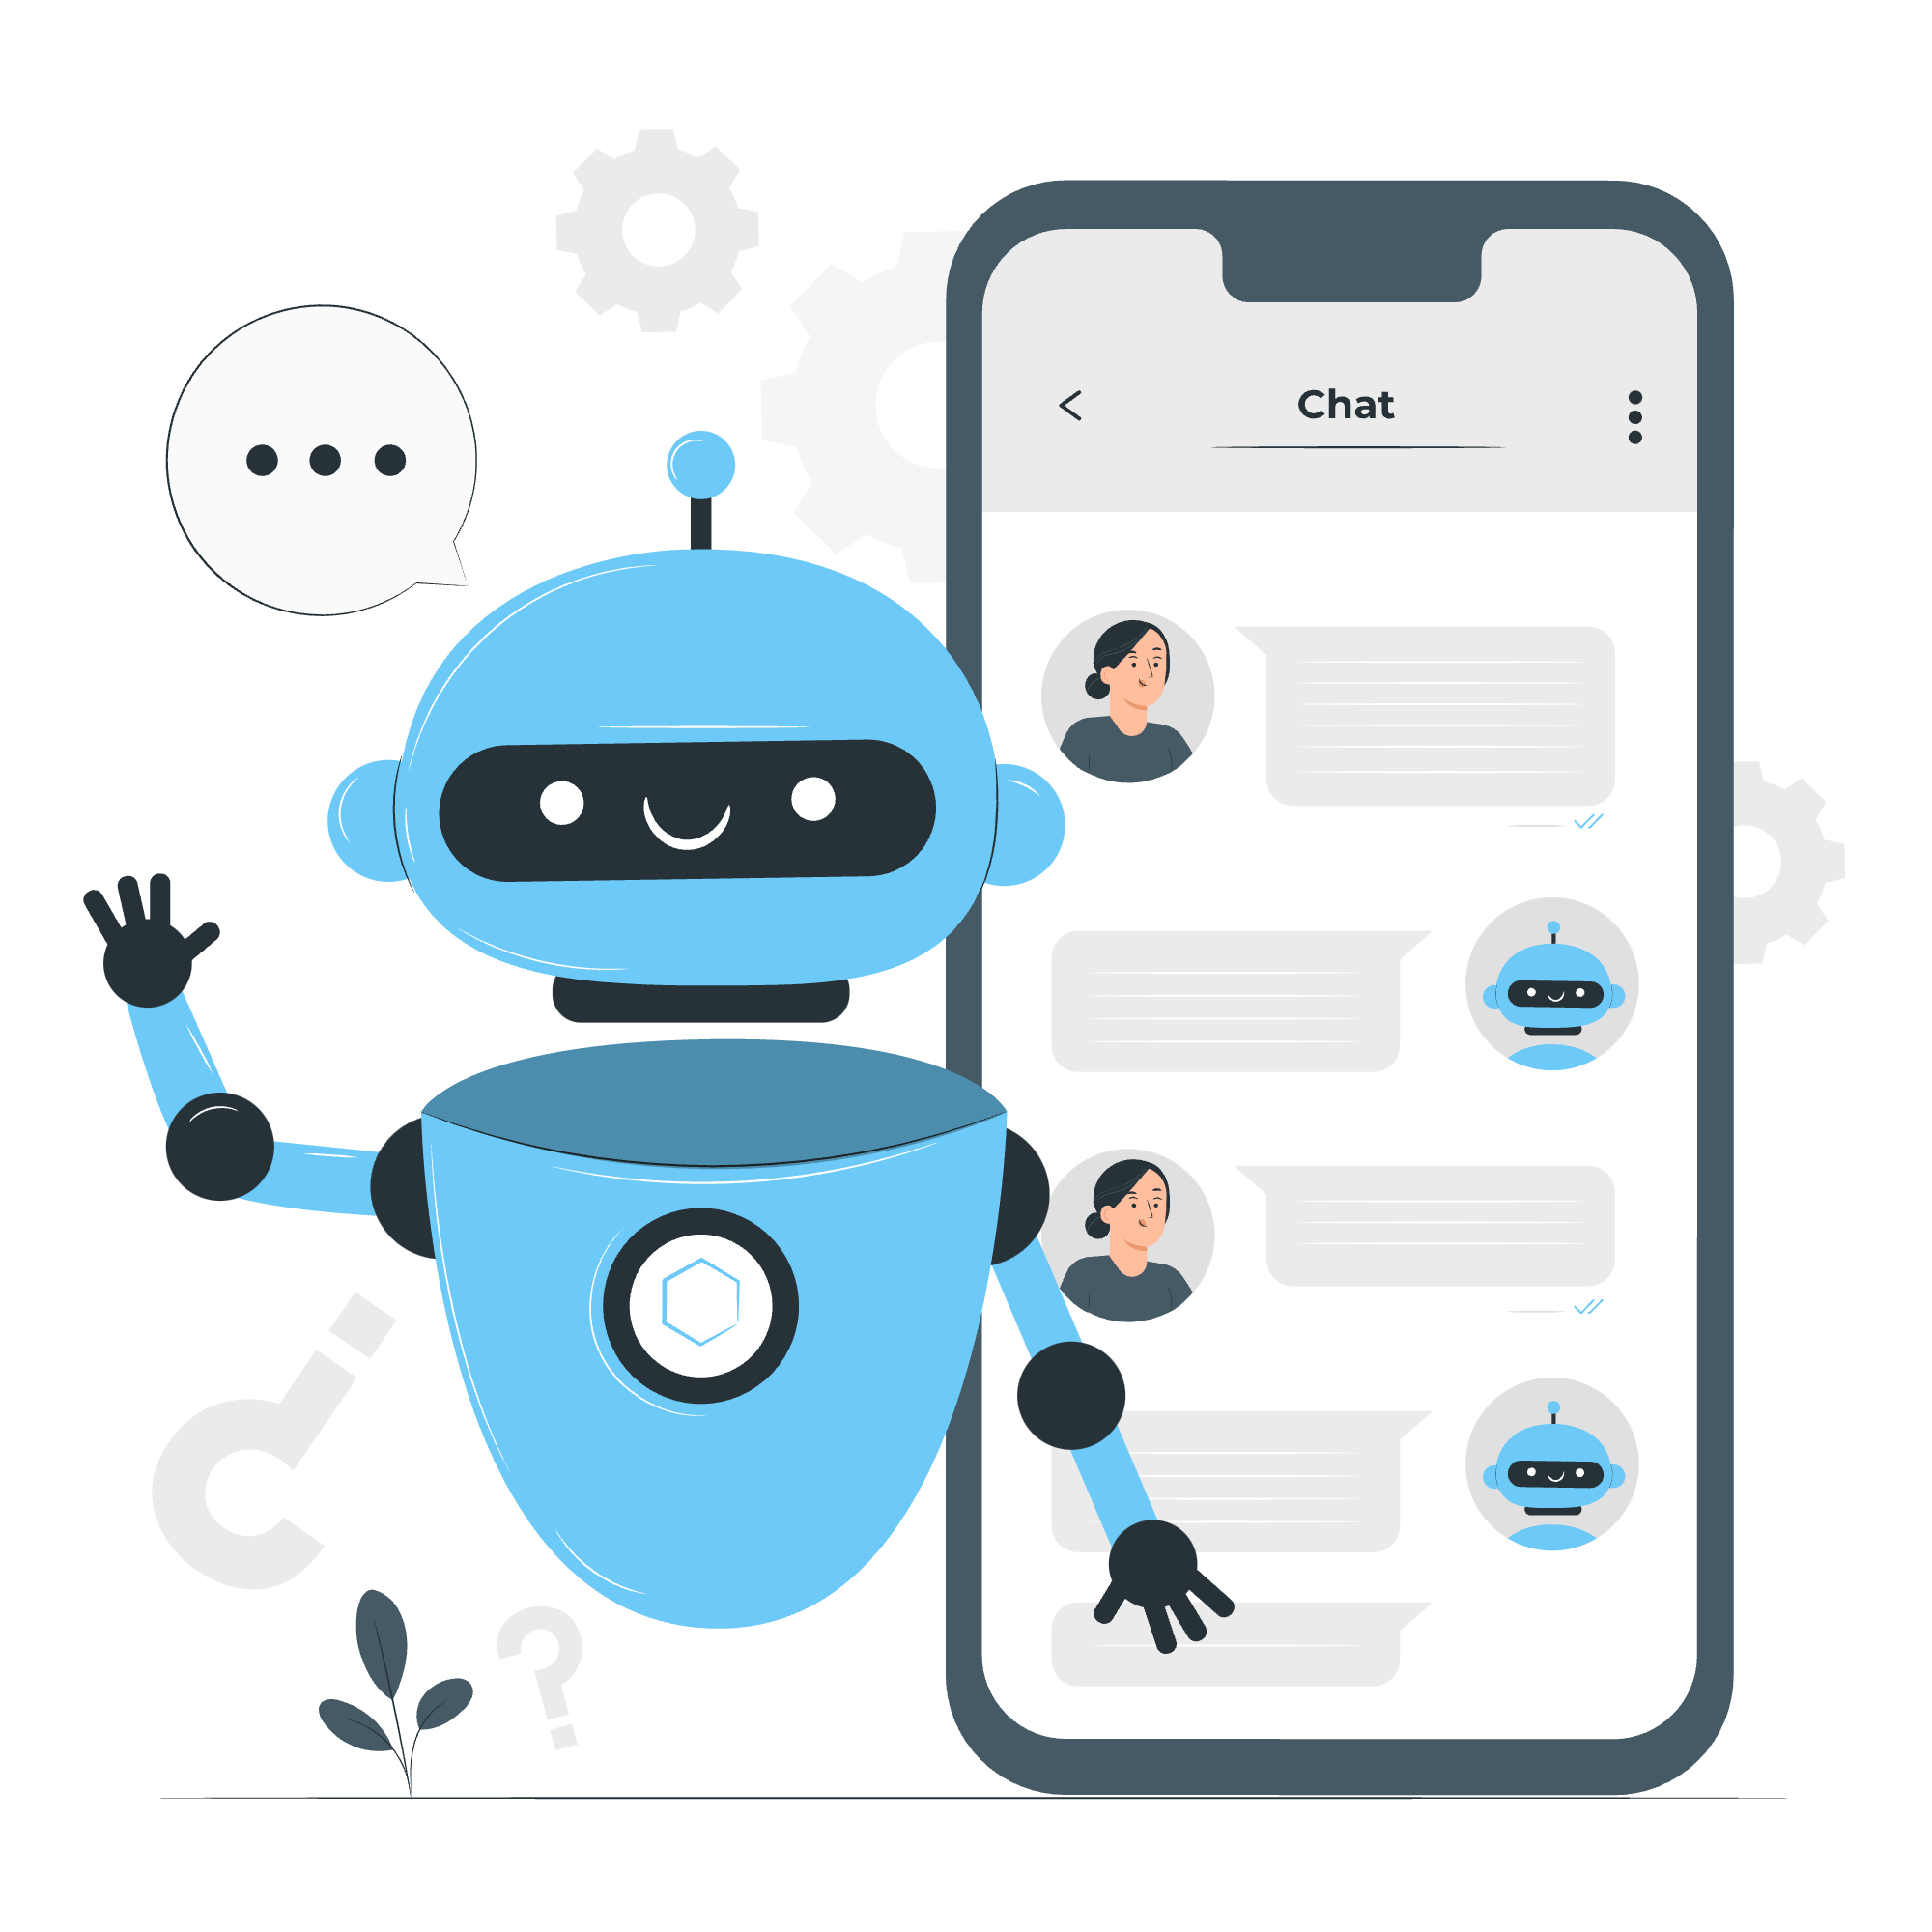 Development of AI-powered chatbots for automated customer support and interaction.